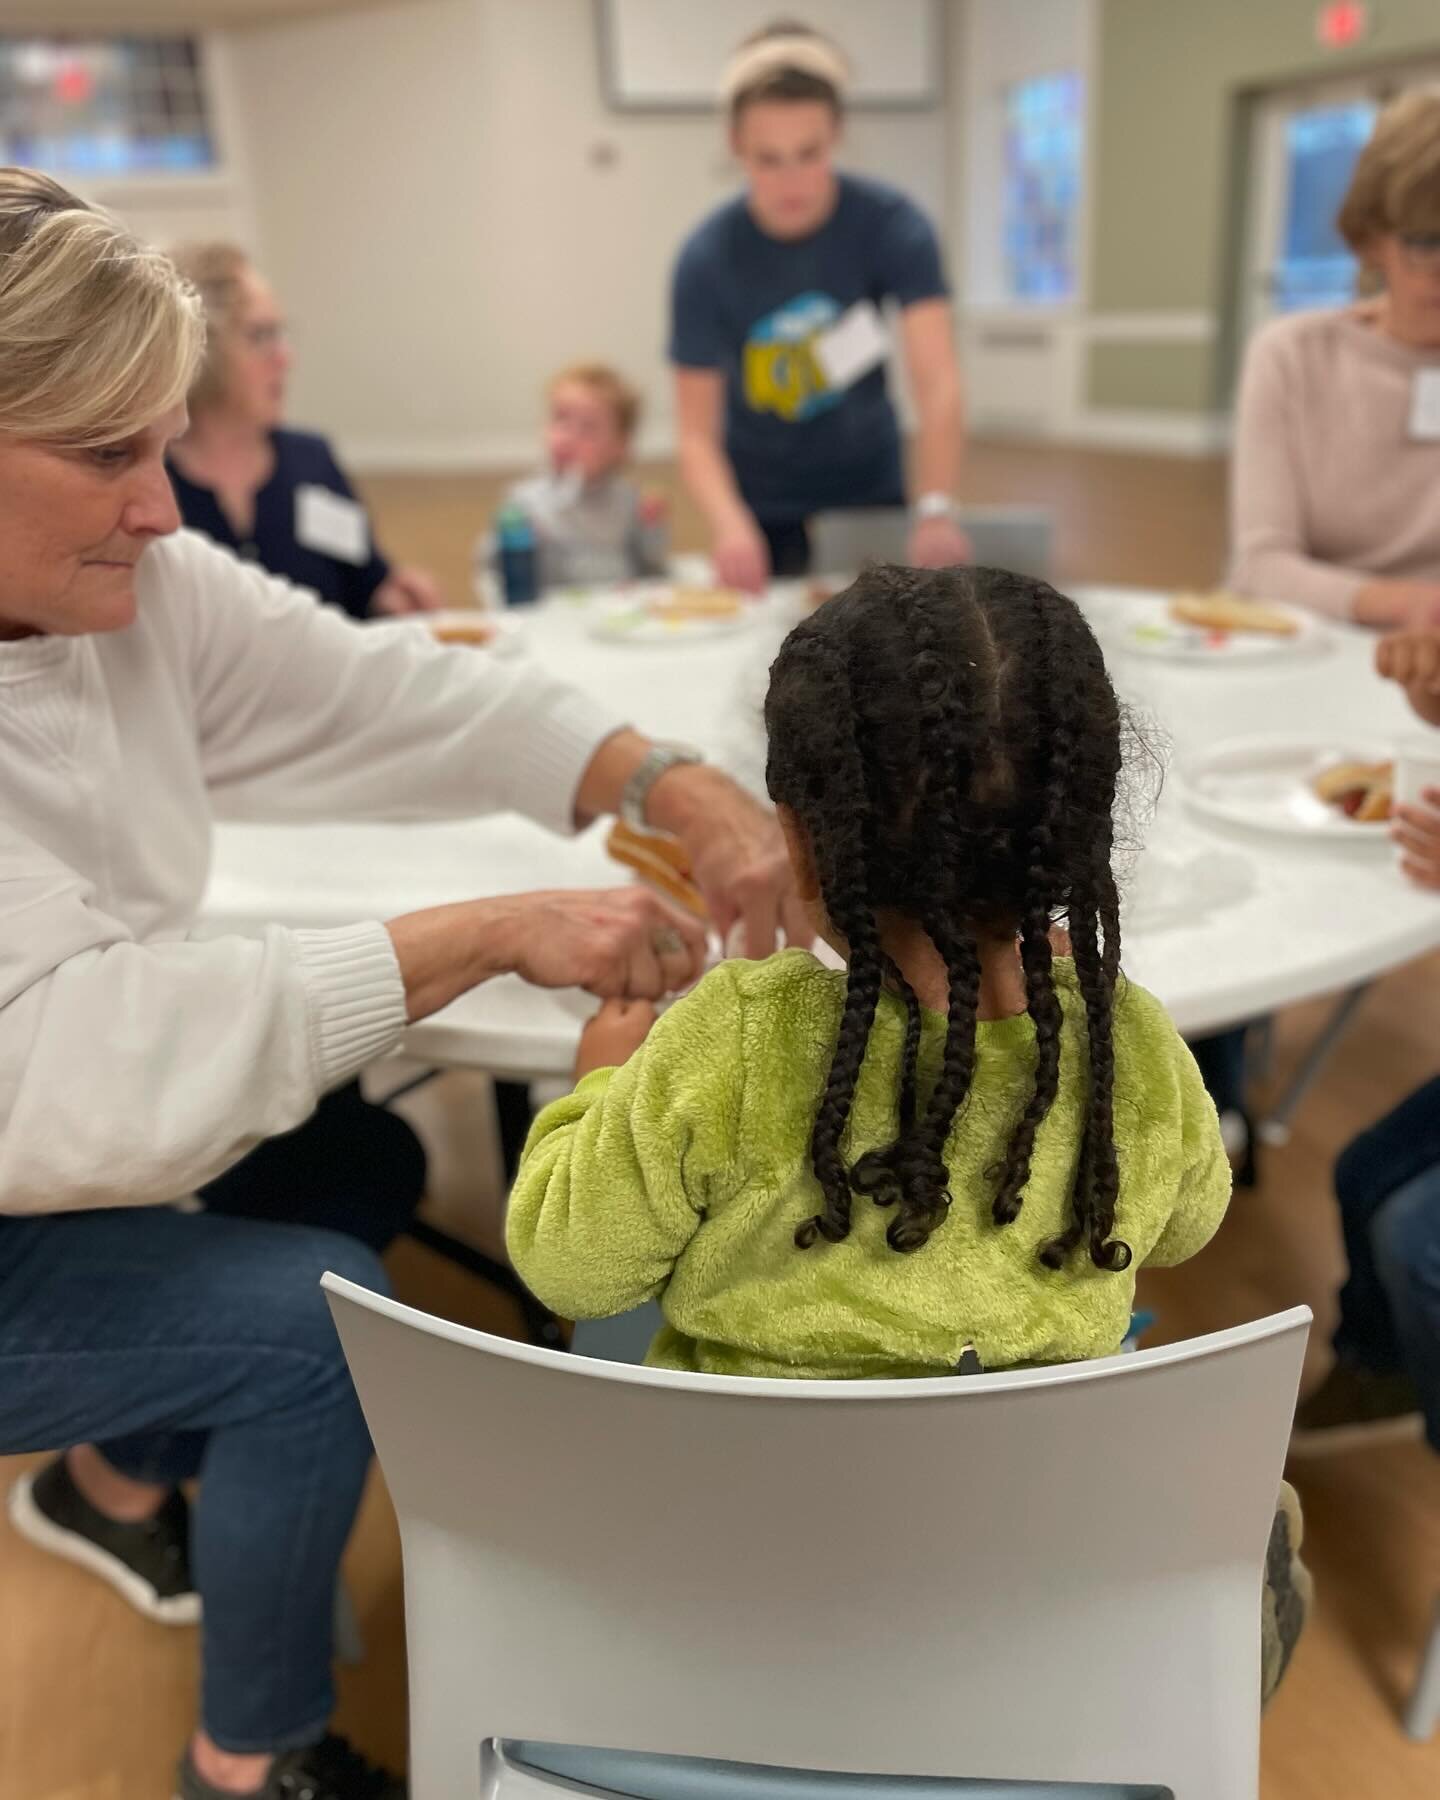 Have you signed up to volunteer with us this month? 

We&rsquo;d love to see you at our Adoptive/Kinship/Foster Parents&rsquo; Night Out on March 23! Follow our link in our bio to find out more and sign up to help RVA families thrive!

#VillageGreenR